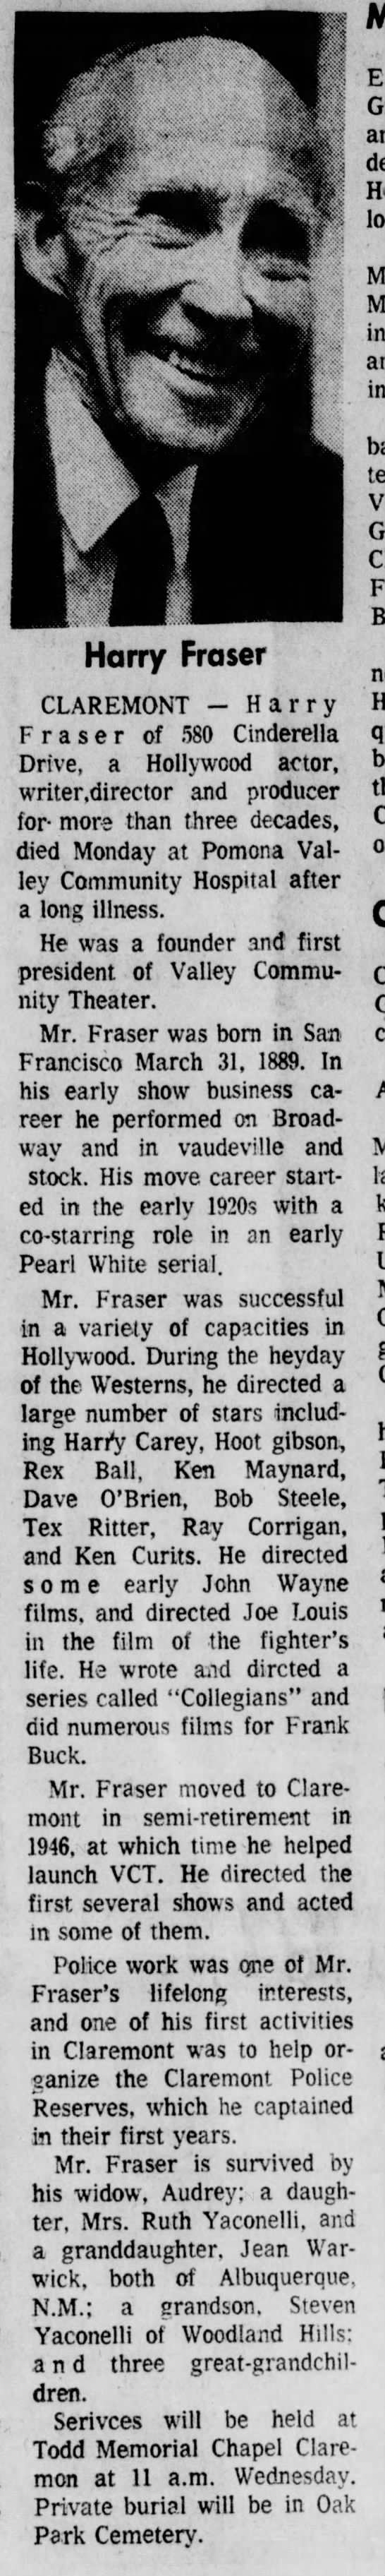 Death notice on movie director Harry Fraser.  He directed scores of westerns in early Hollywood. - 